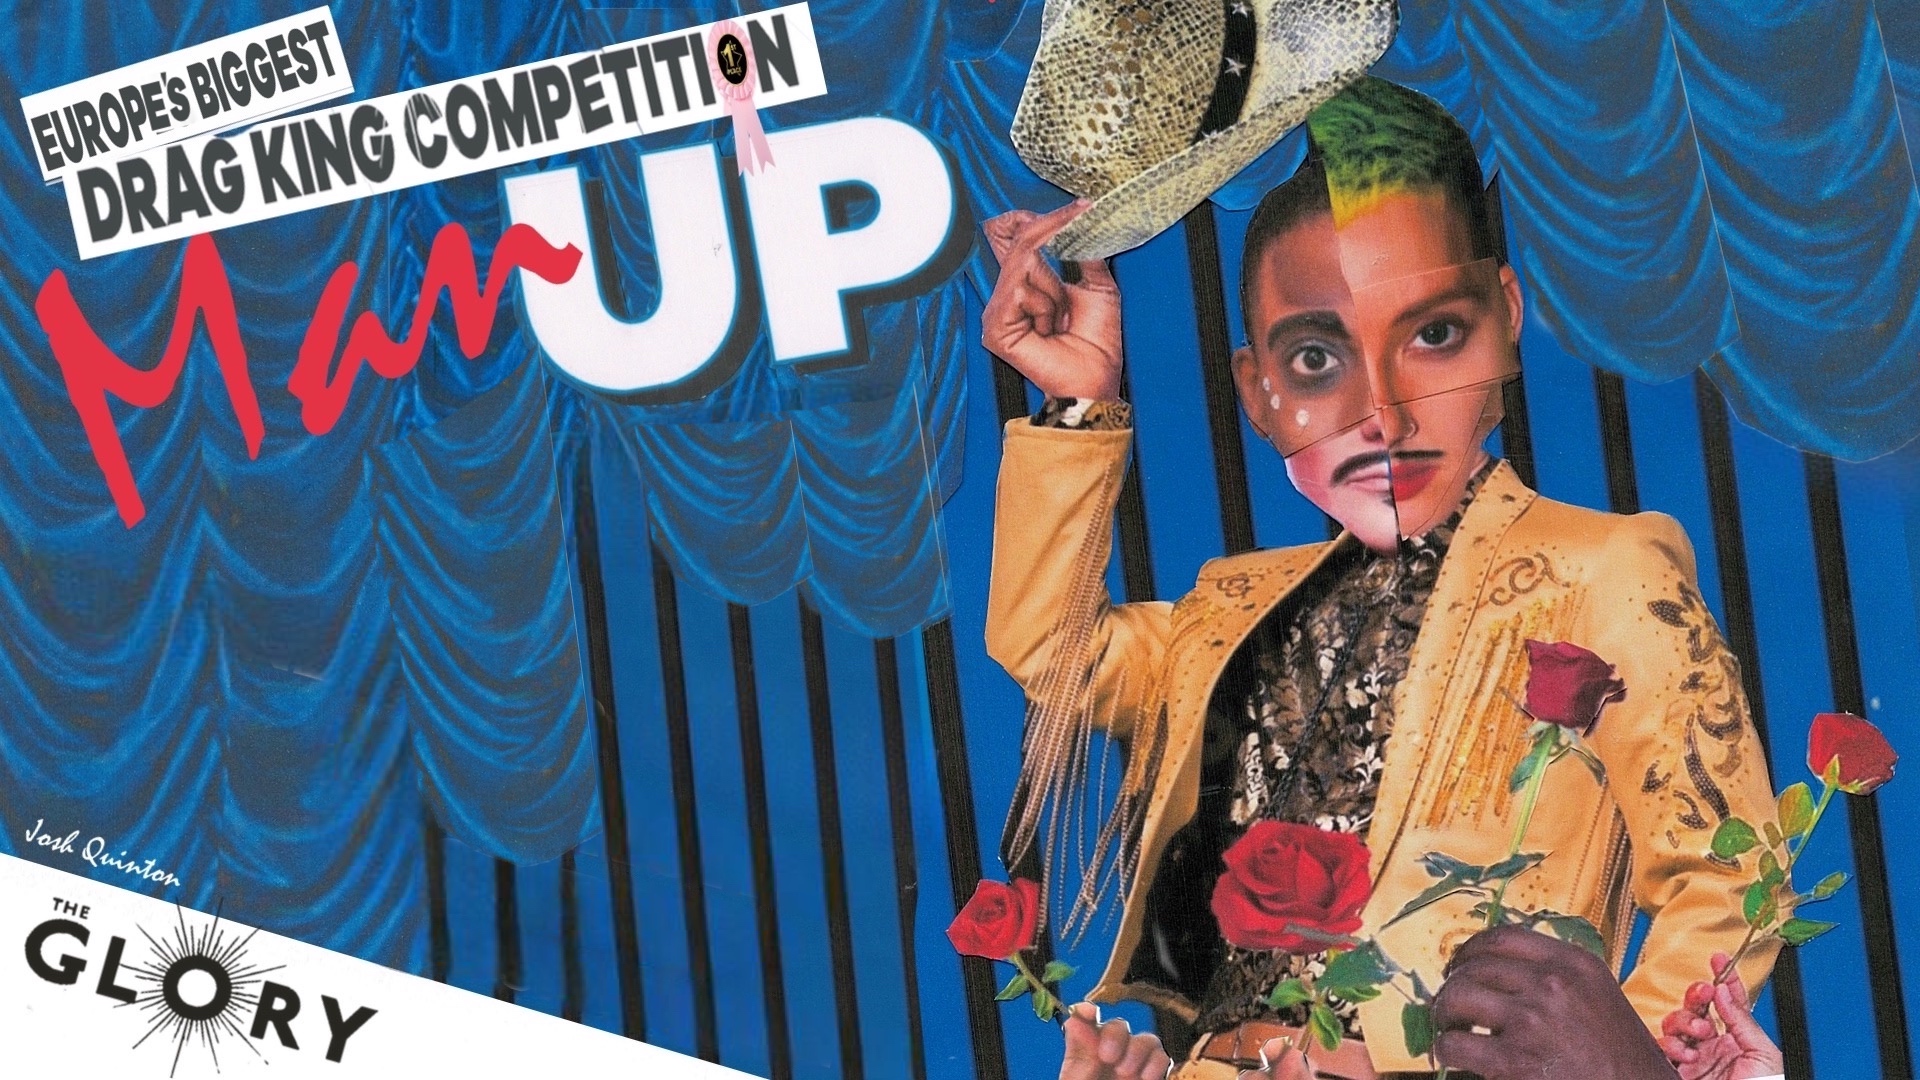 Man Up! Drag King Competition – HEAT 9